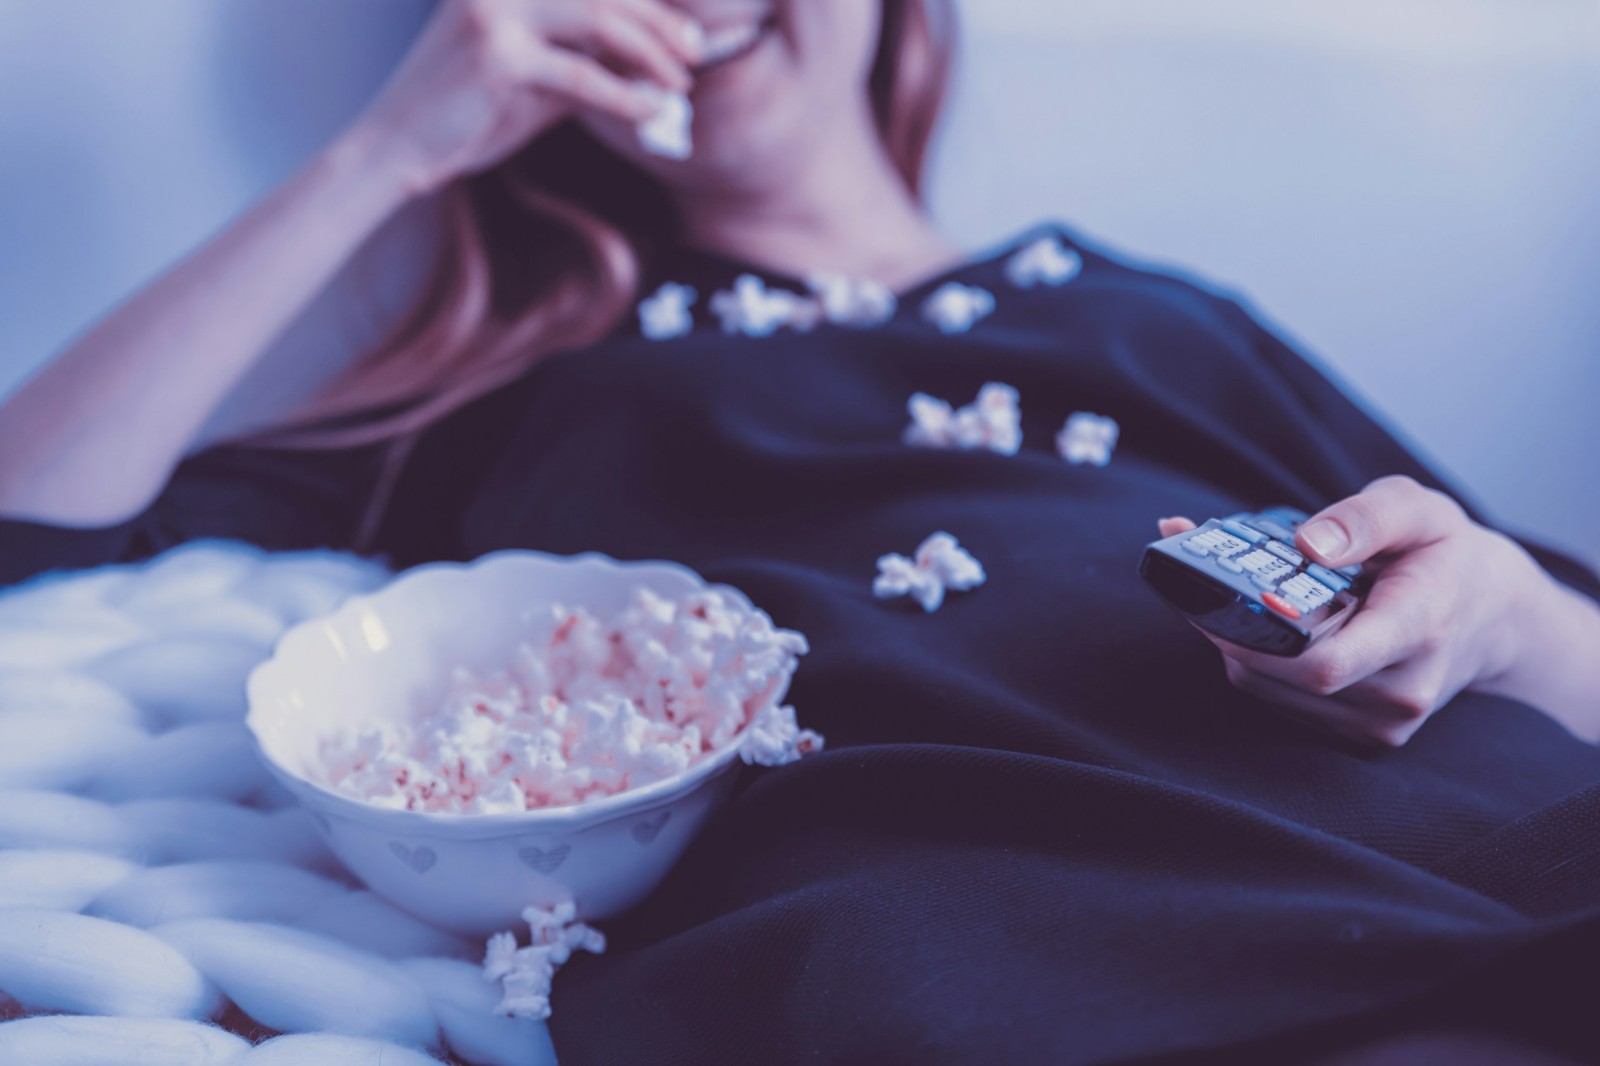 A woman eating popcorn laying down.